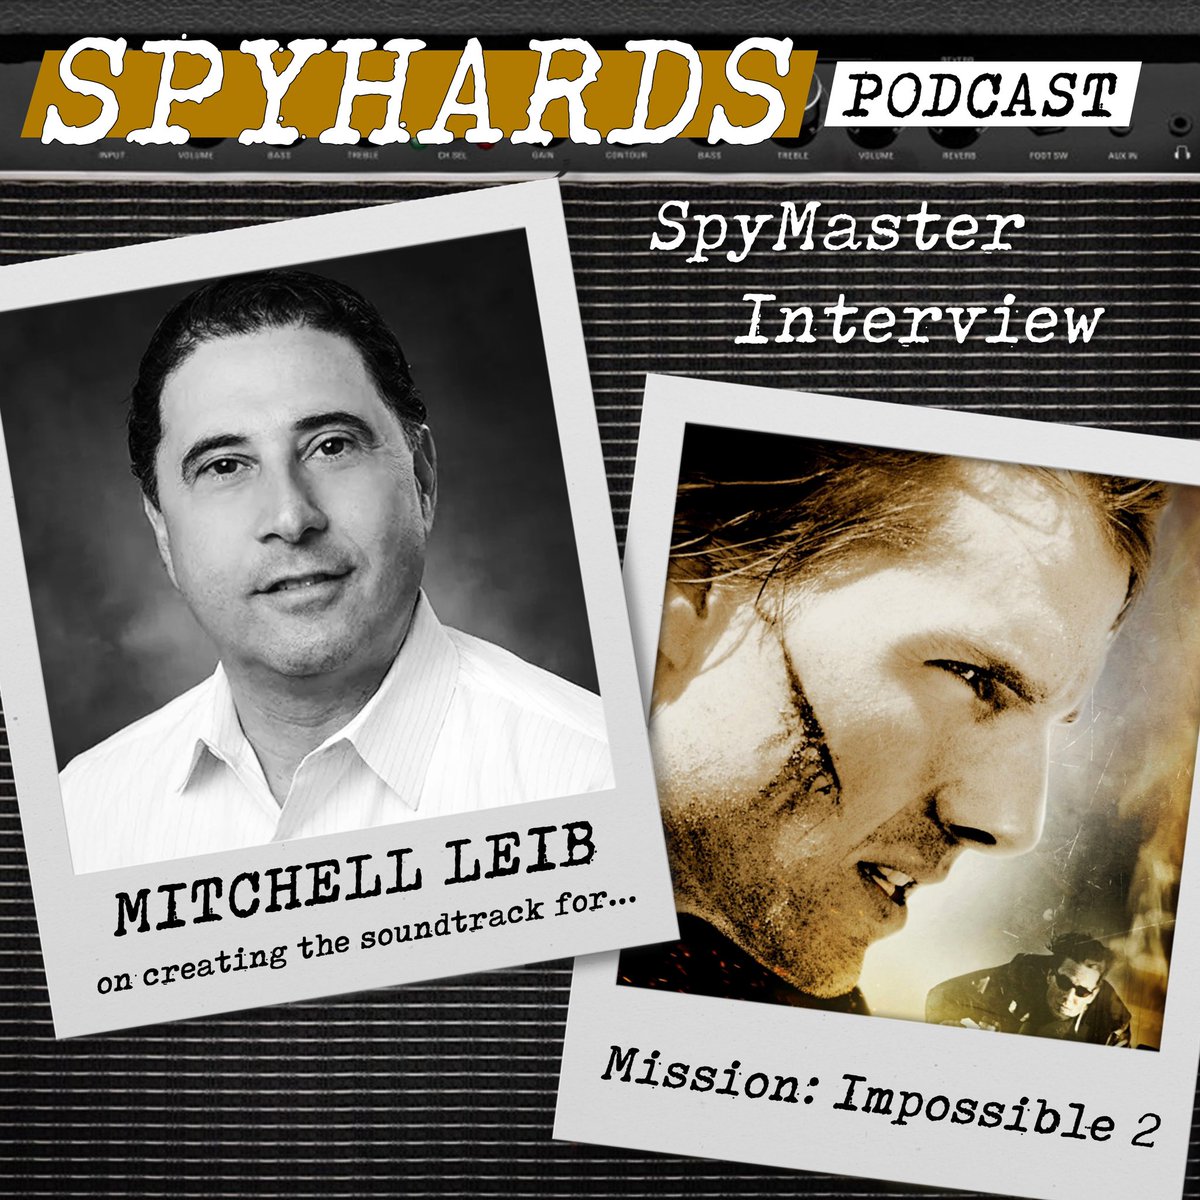 New SpyMaster Interview🎙️ We welcome Mitchell Leib to the show to talk about producing the hit Mission: Impossible II soundtrack album! We chat Limp Bizkit, Metallica and what went into making multi-platinum selling record… Listen now: pod.fo/e/21b9a4